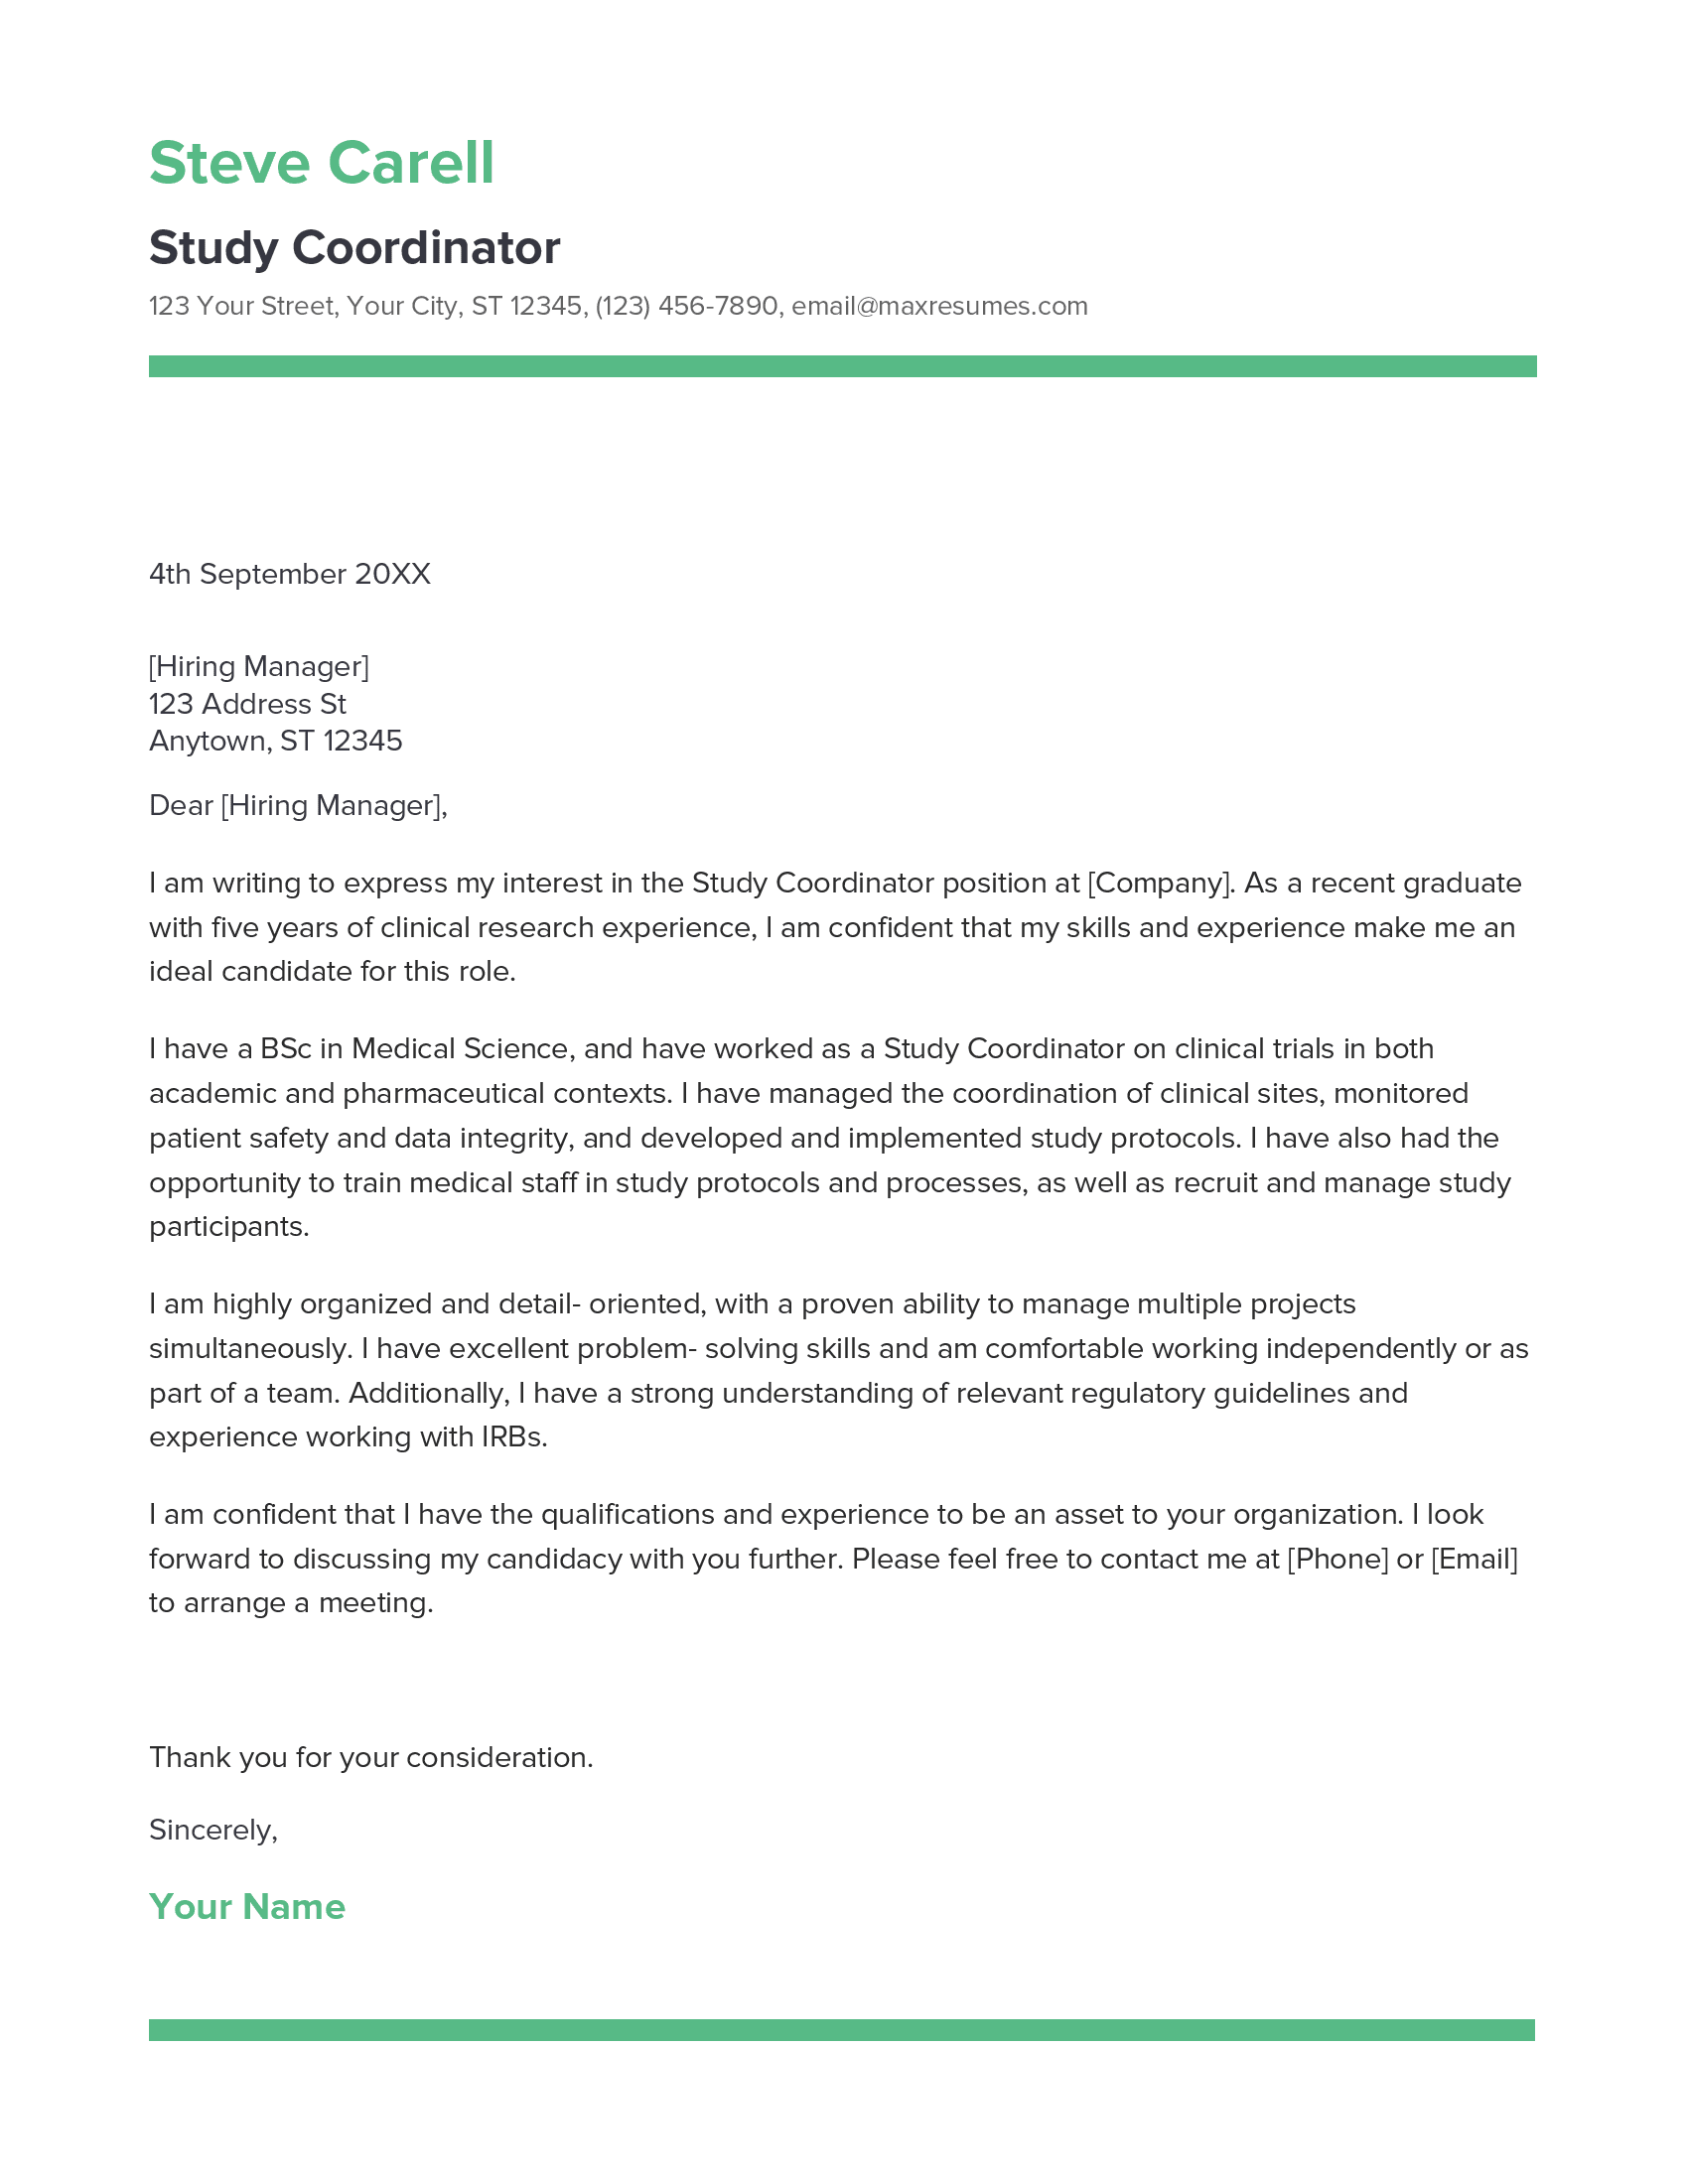 Study Coordinator Cover Letter Example